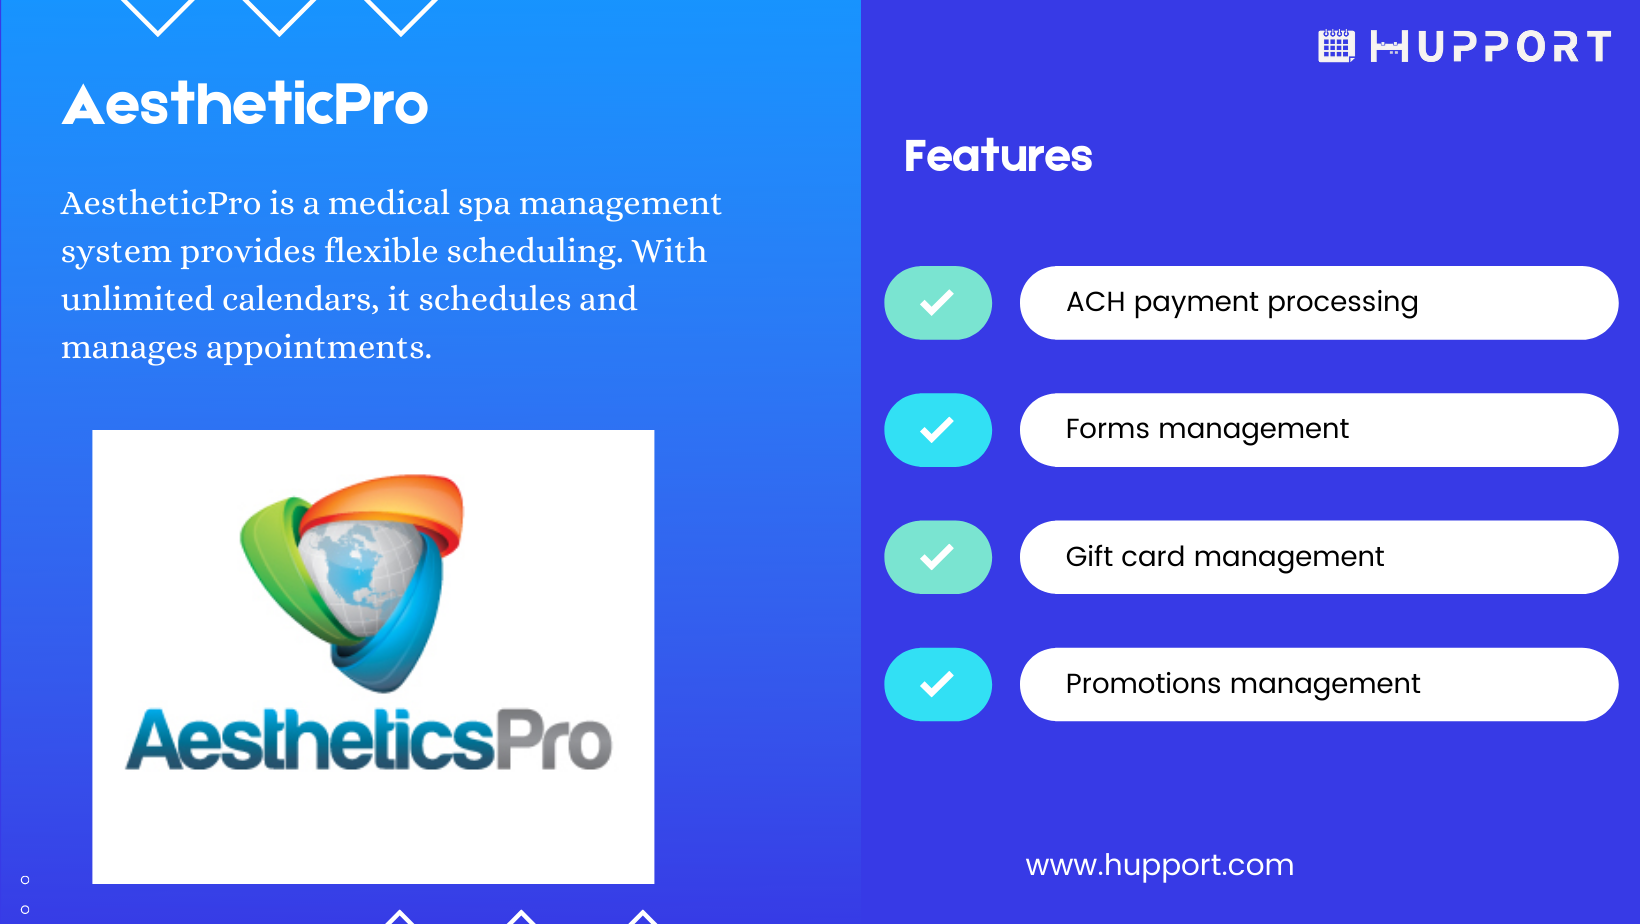 AestheticPro management software